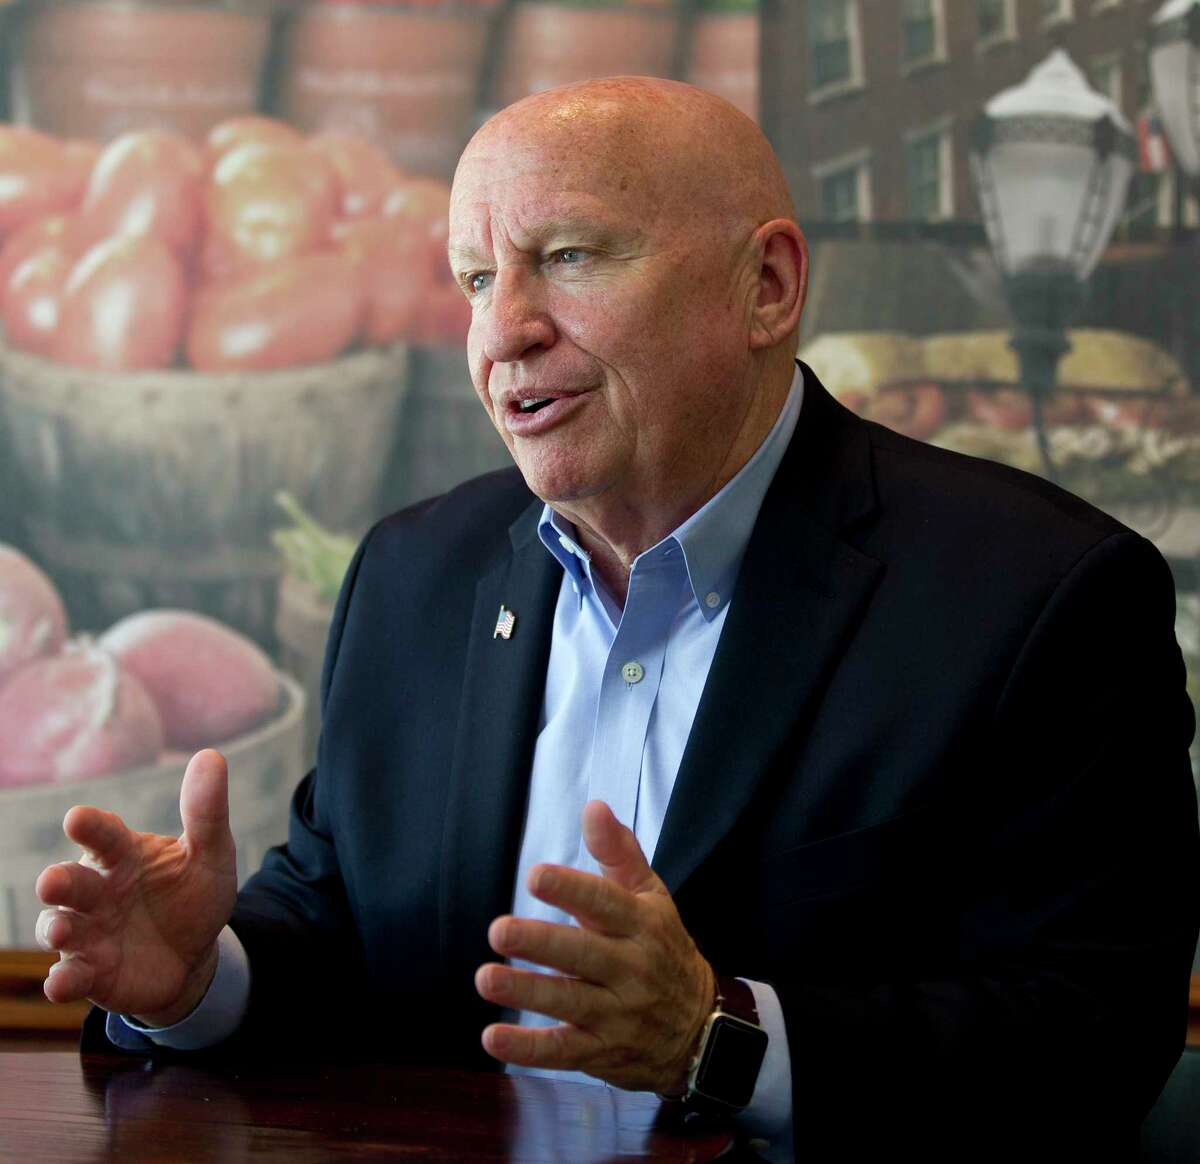 U.S. Rep. Kevin Brady, R-The Woodlands, talks with a reporter at Corner Bakery, Tuesday, May 30, 2017, in The Woodlands. Brady is also chairman of the House Ways and Means Committee.